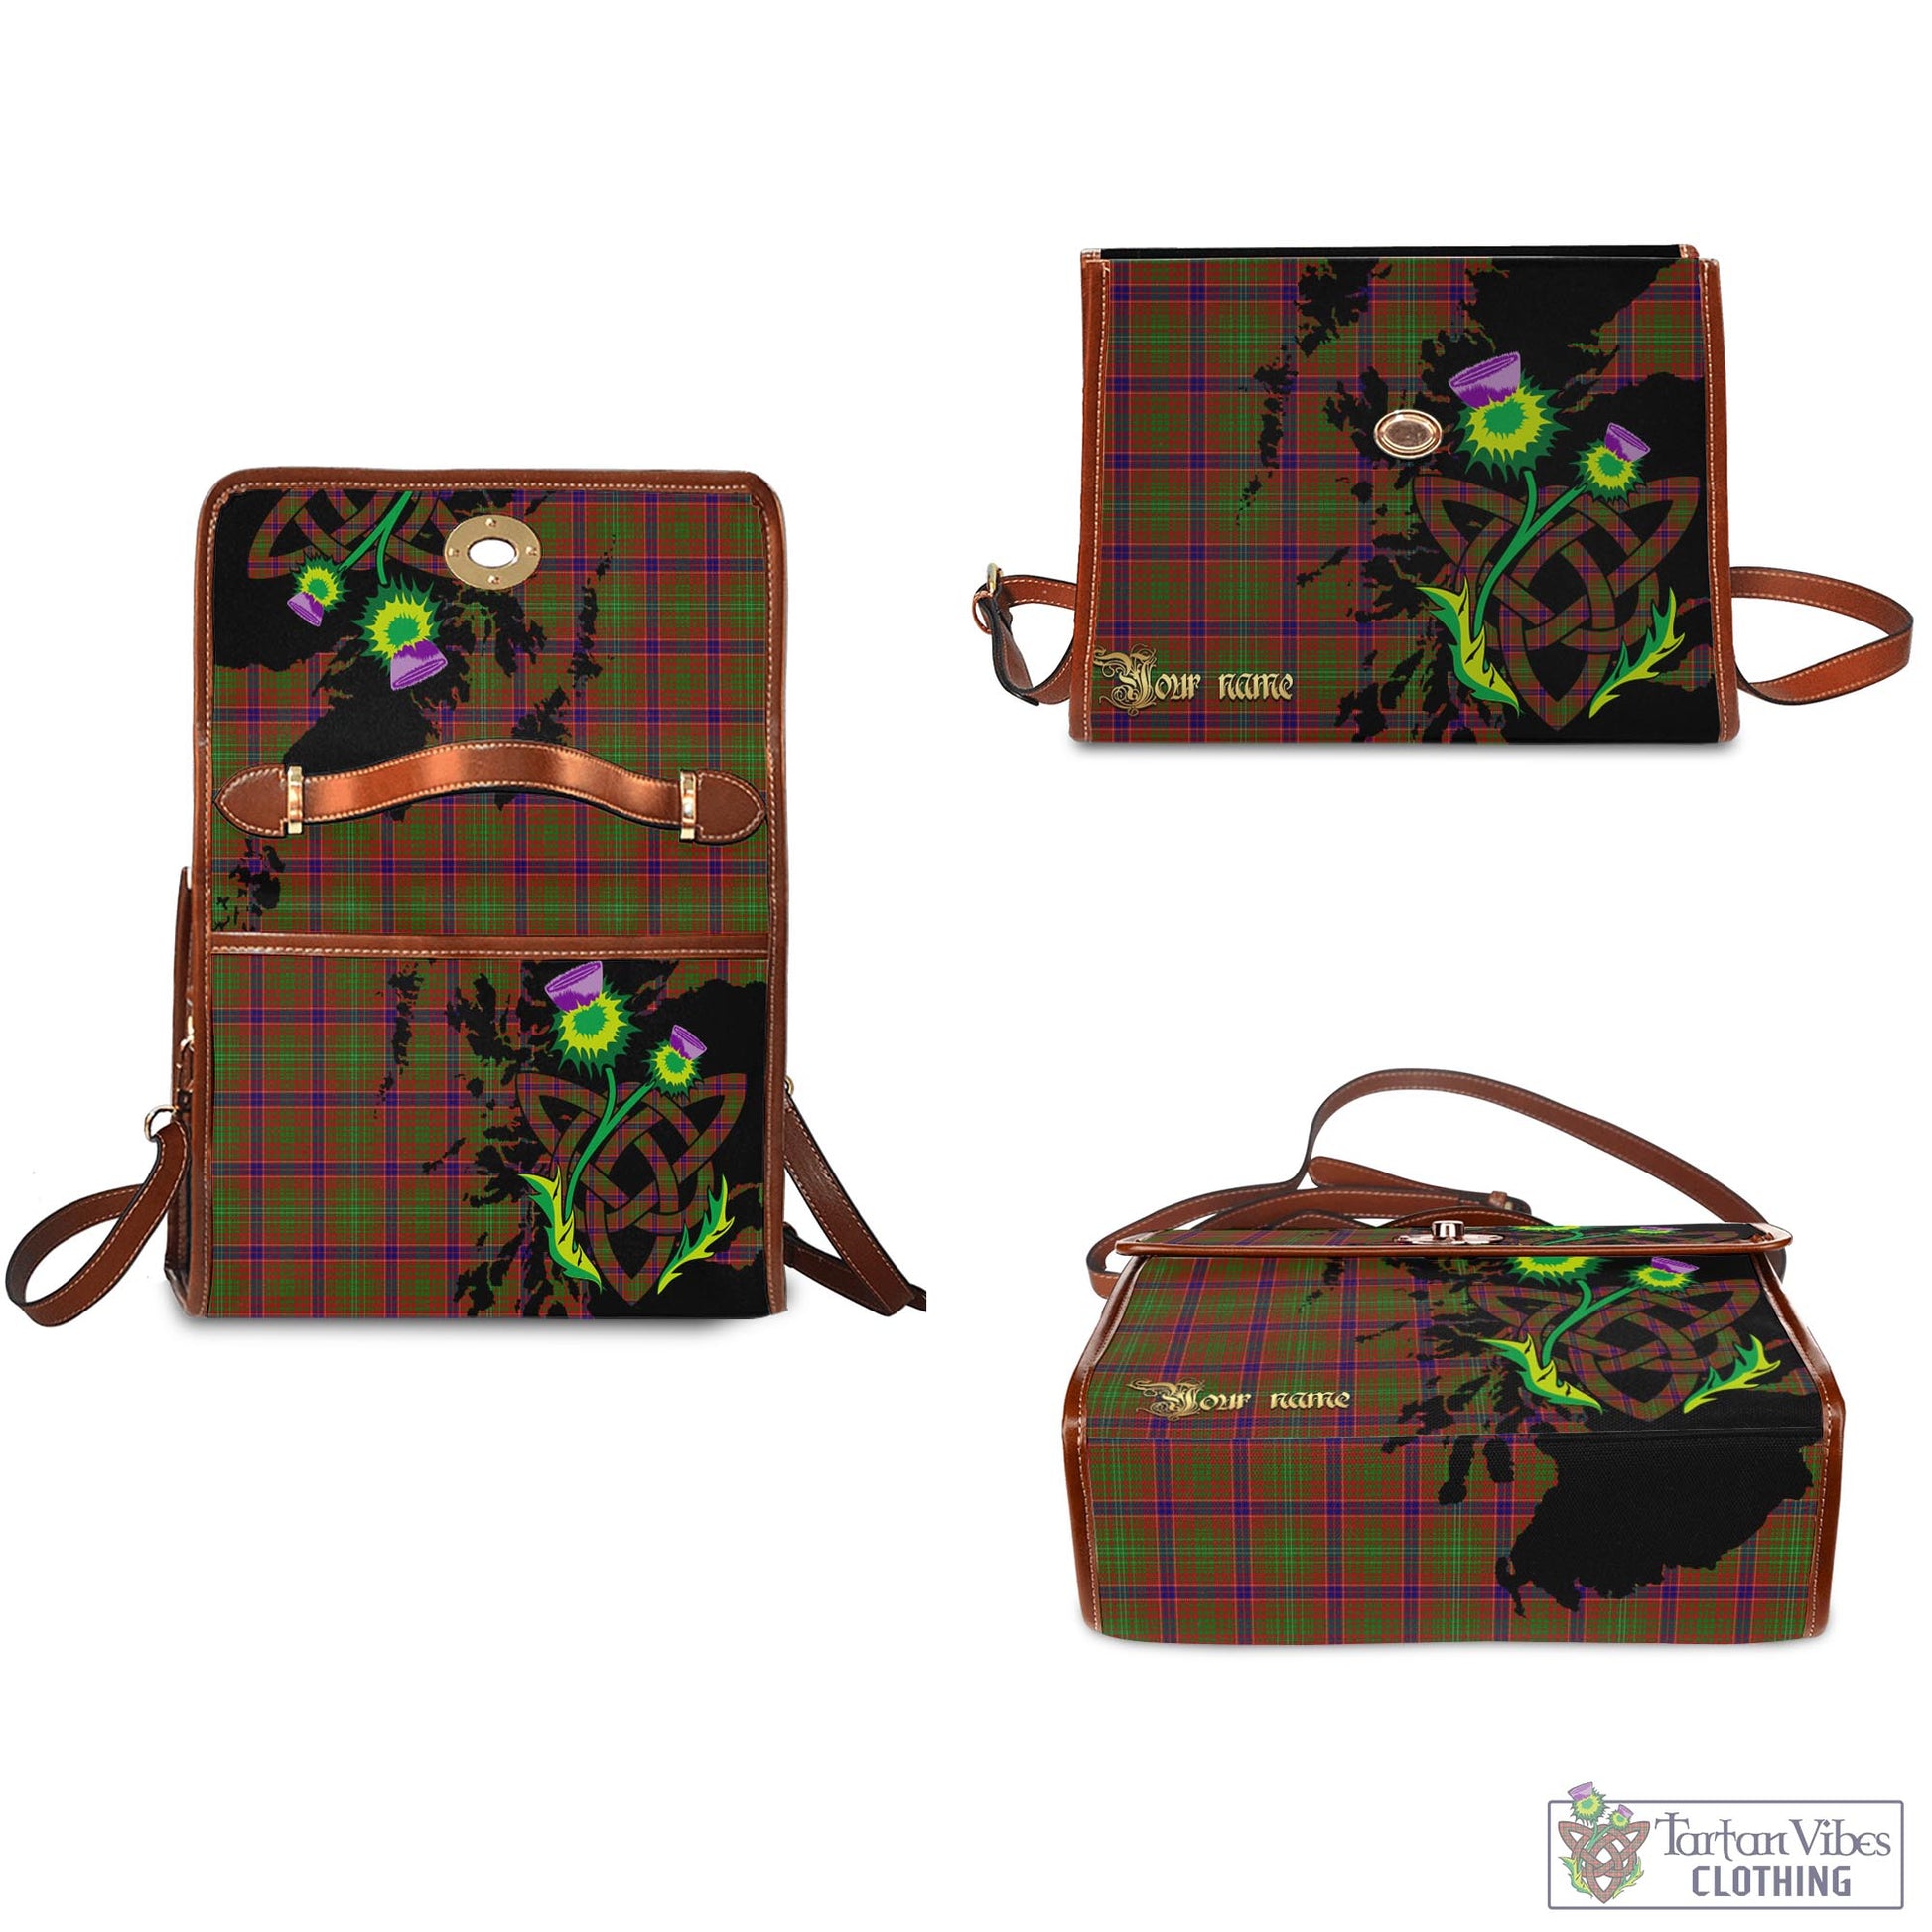 Tartan Vibes Clothing Lumsden Tartan Waterproof Canvas Bag with Scotland Map and Thistle Celtic Accents